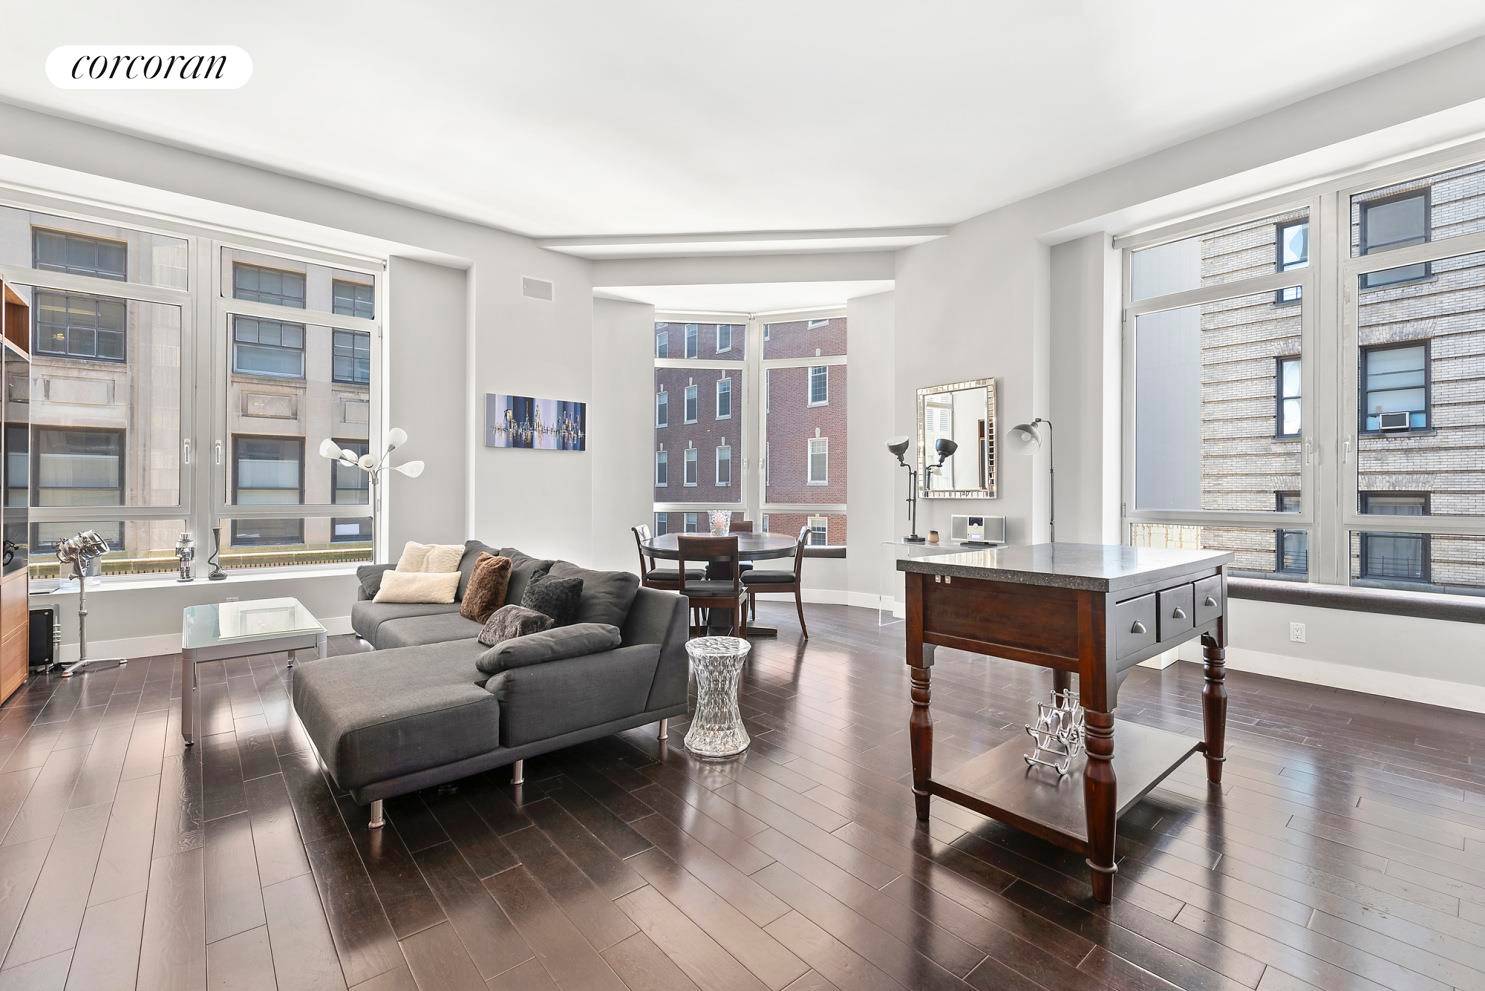 111 Fulton Street, Apt. 514 a 2 bedrooms, 2 bathrooms modern and lofty home with 1, 312 SF of interior space, and located in a luxury condominium defined with curated ...